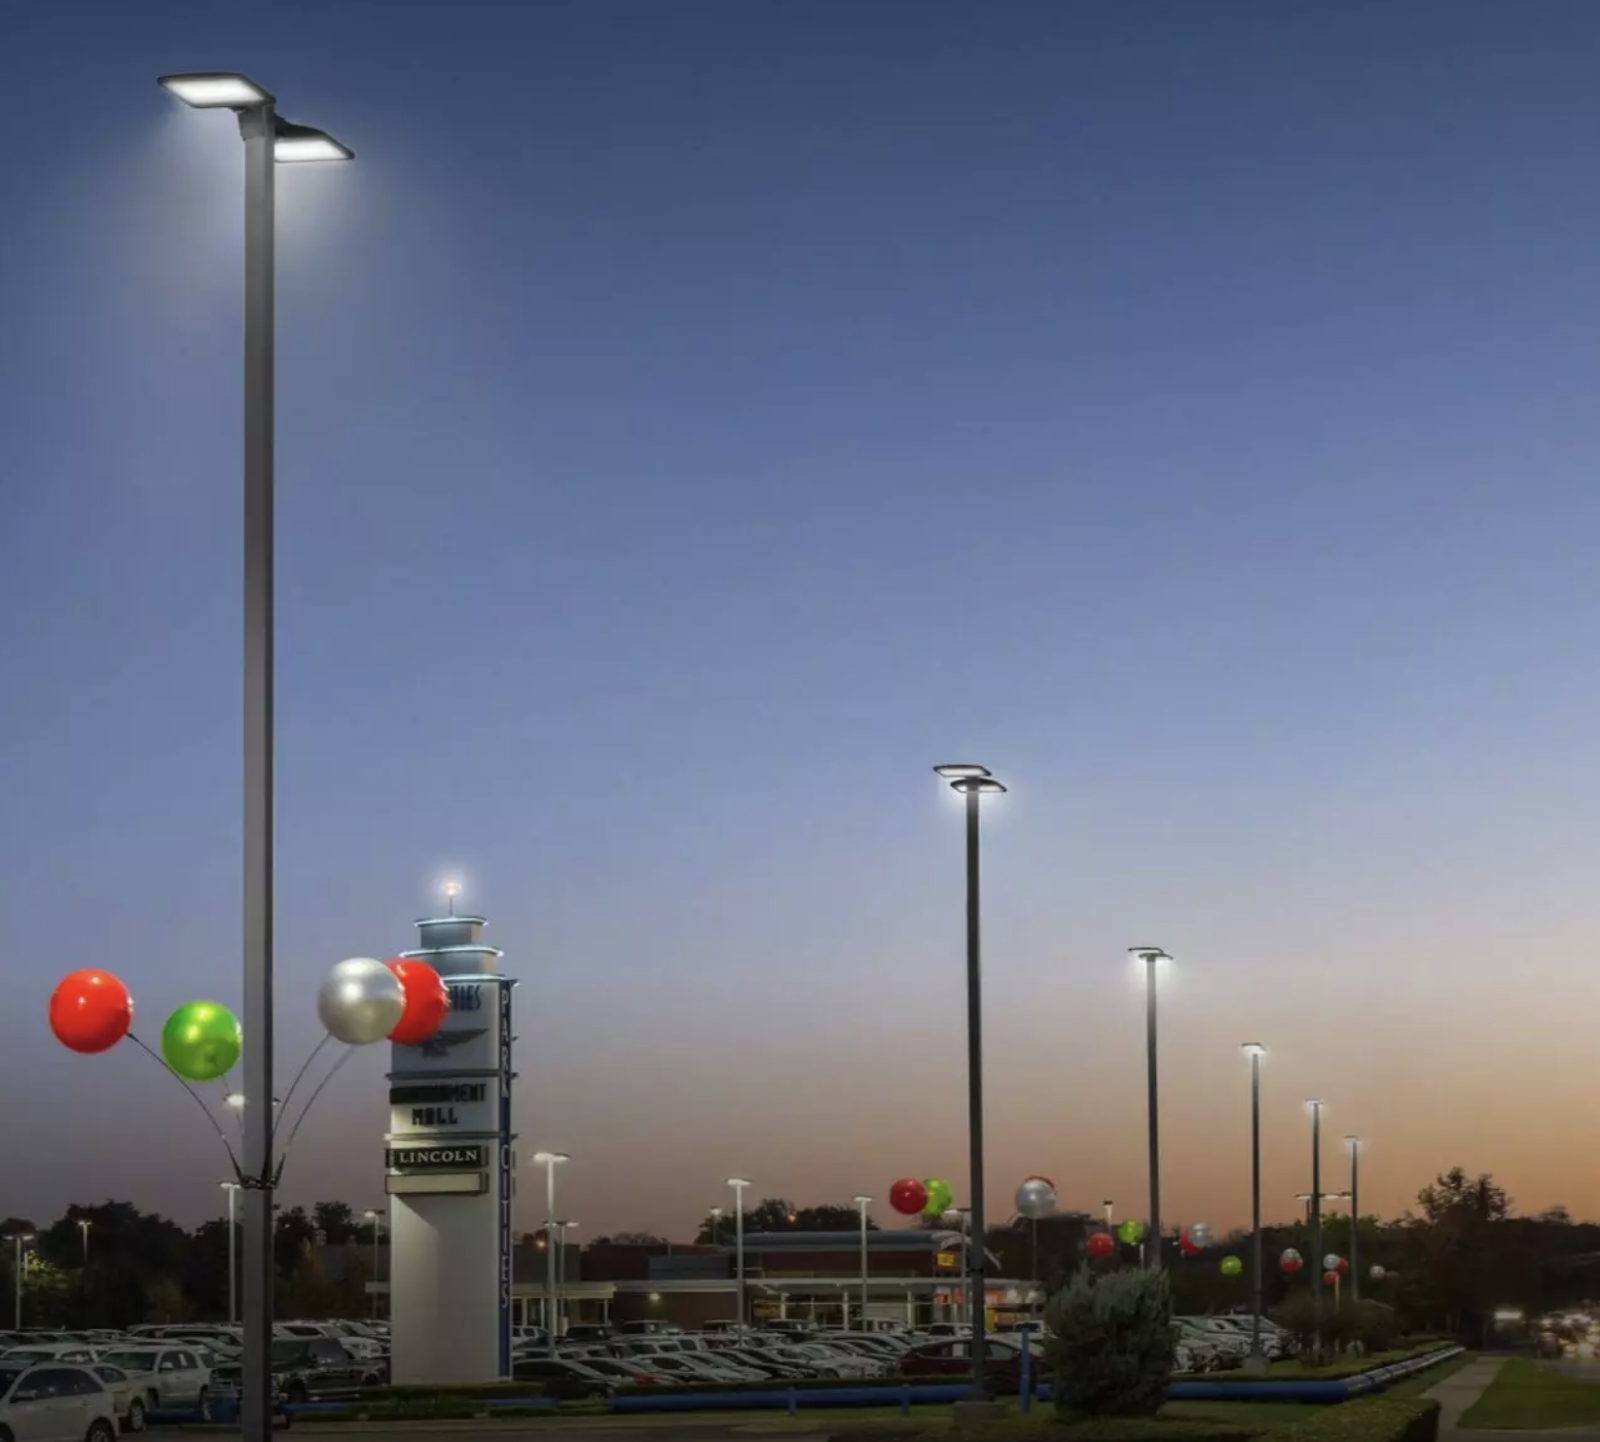 A Buyer's Guide to LED Parking Lot Lights: What to Look For? featured image